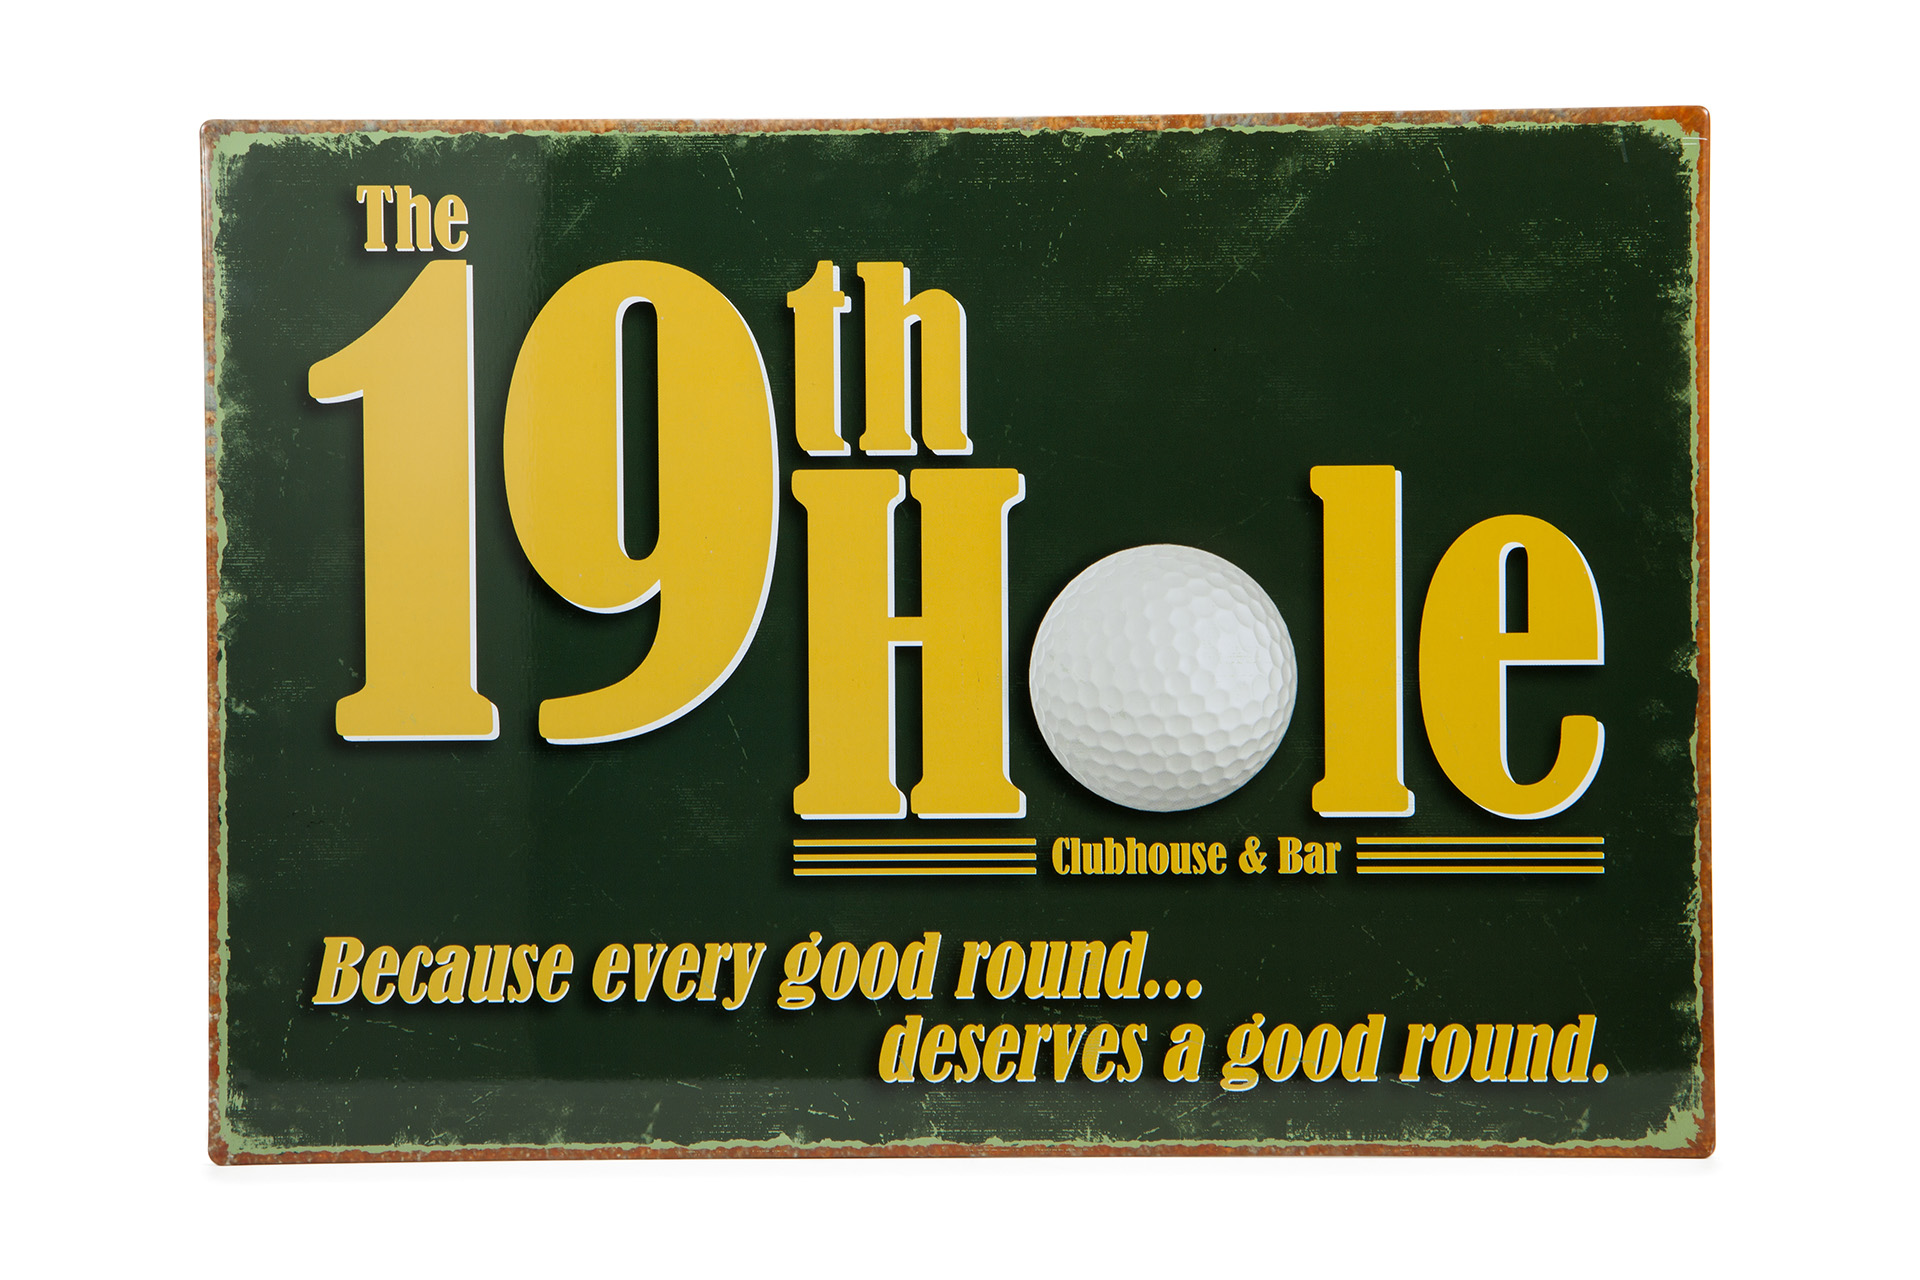 A 19th hole golf sign against a white background